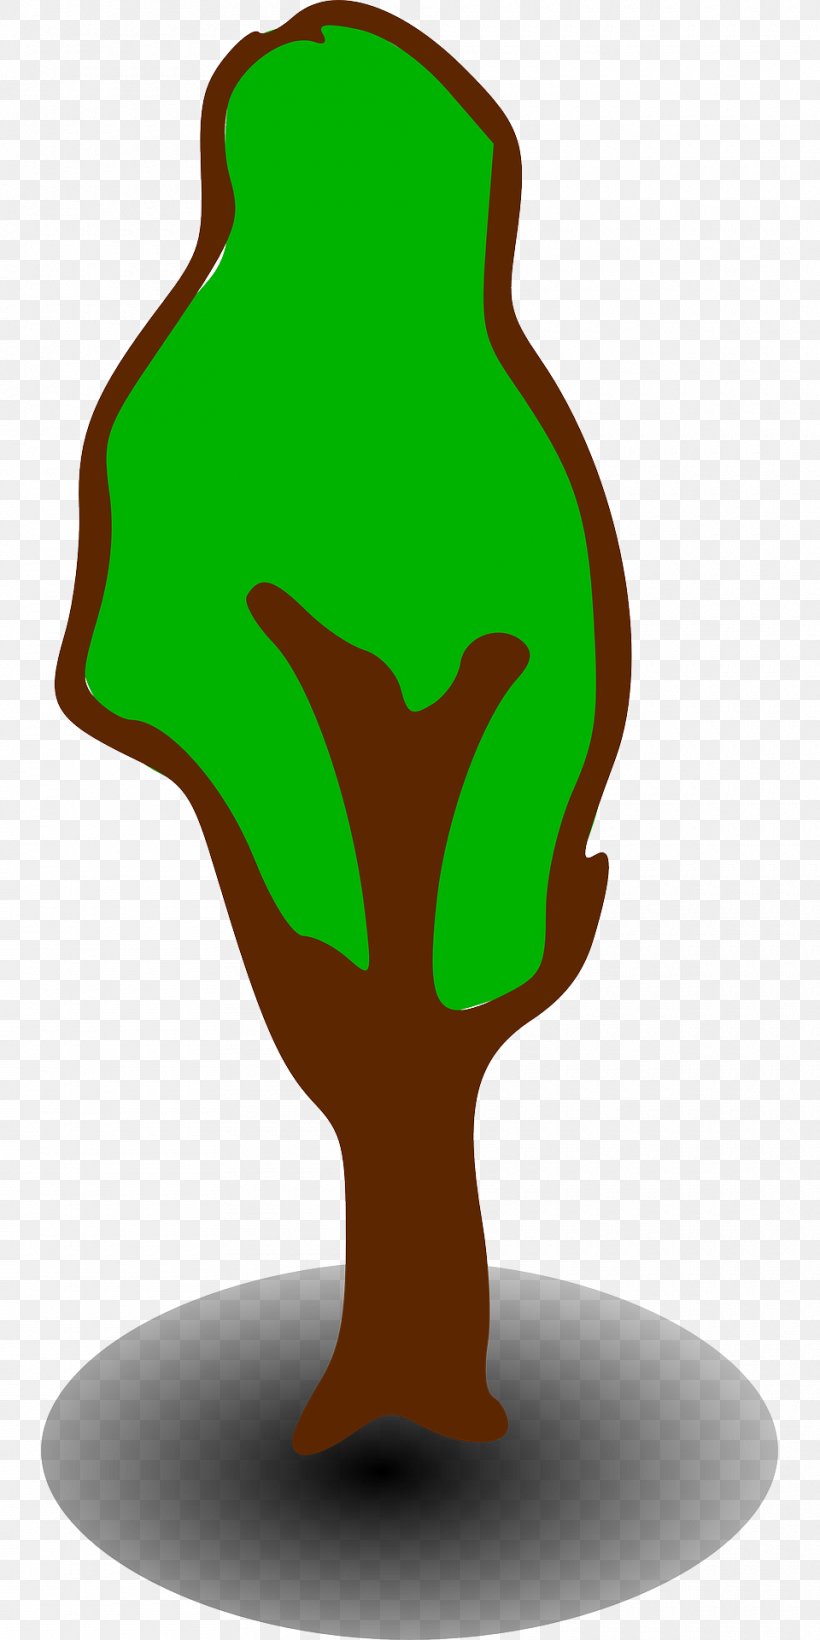 Tree Map Symbol Clip Art, PNG, 960x1920px, Tree, City Map, Grass, Map, Map Symbolization Download Free